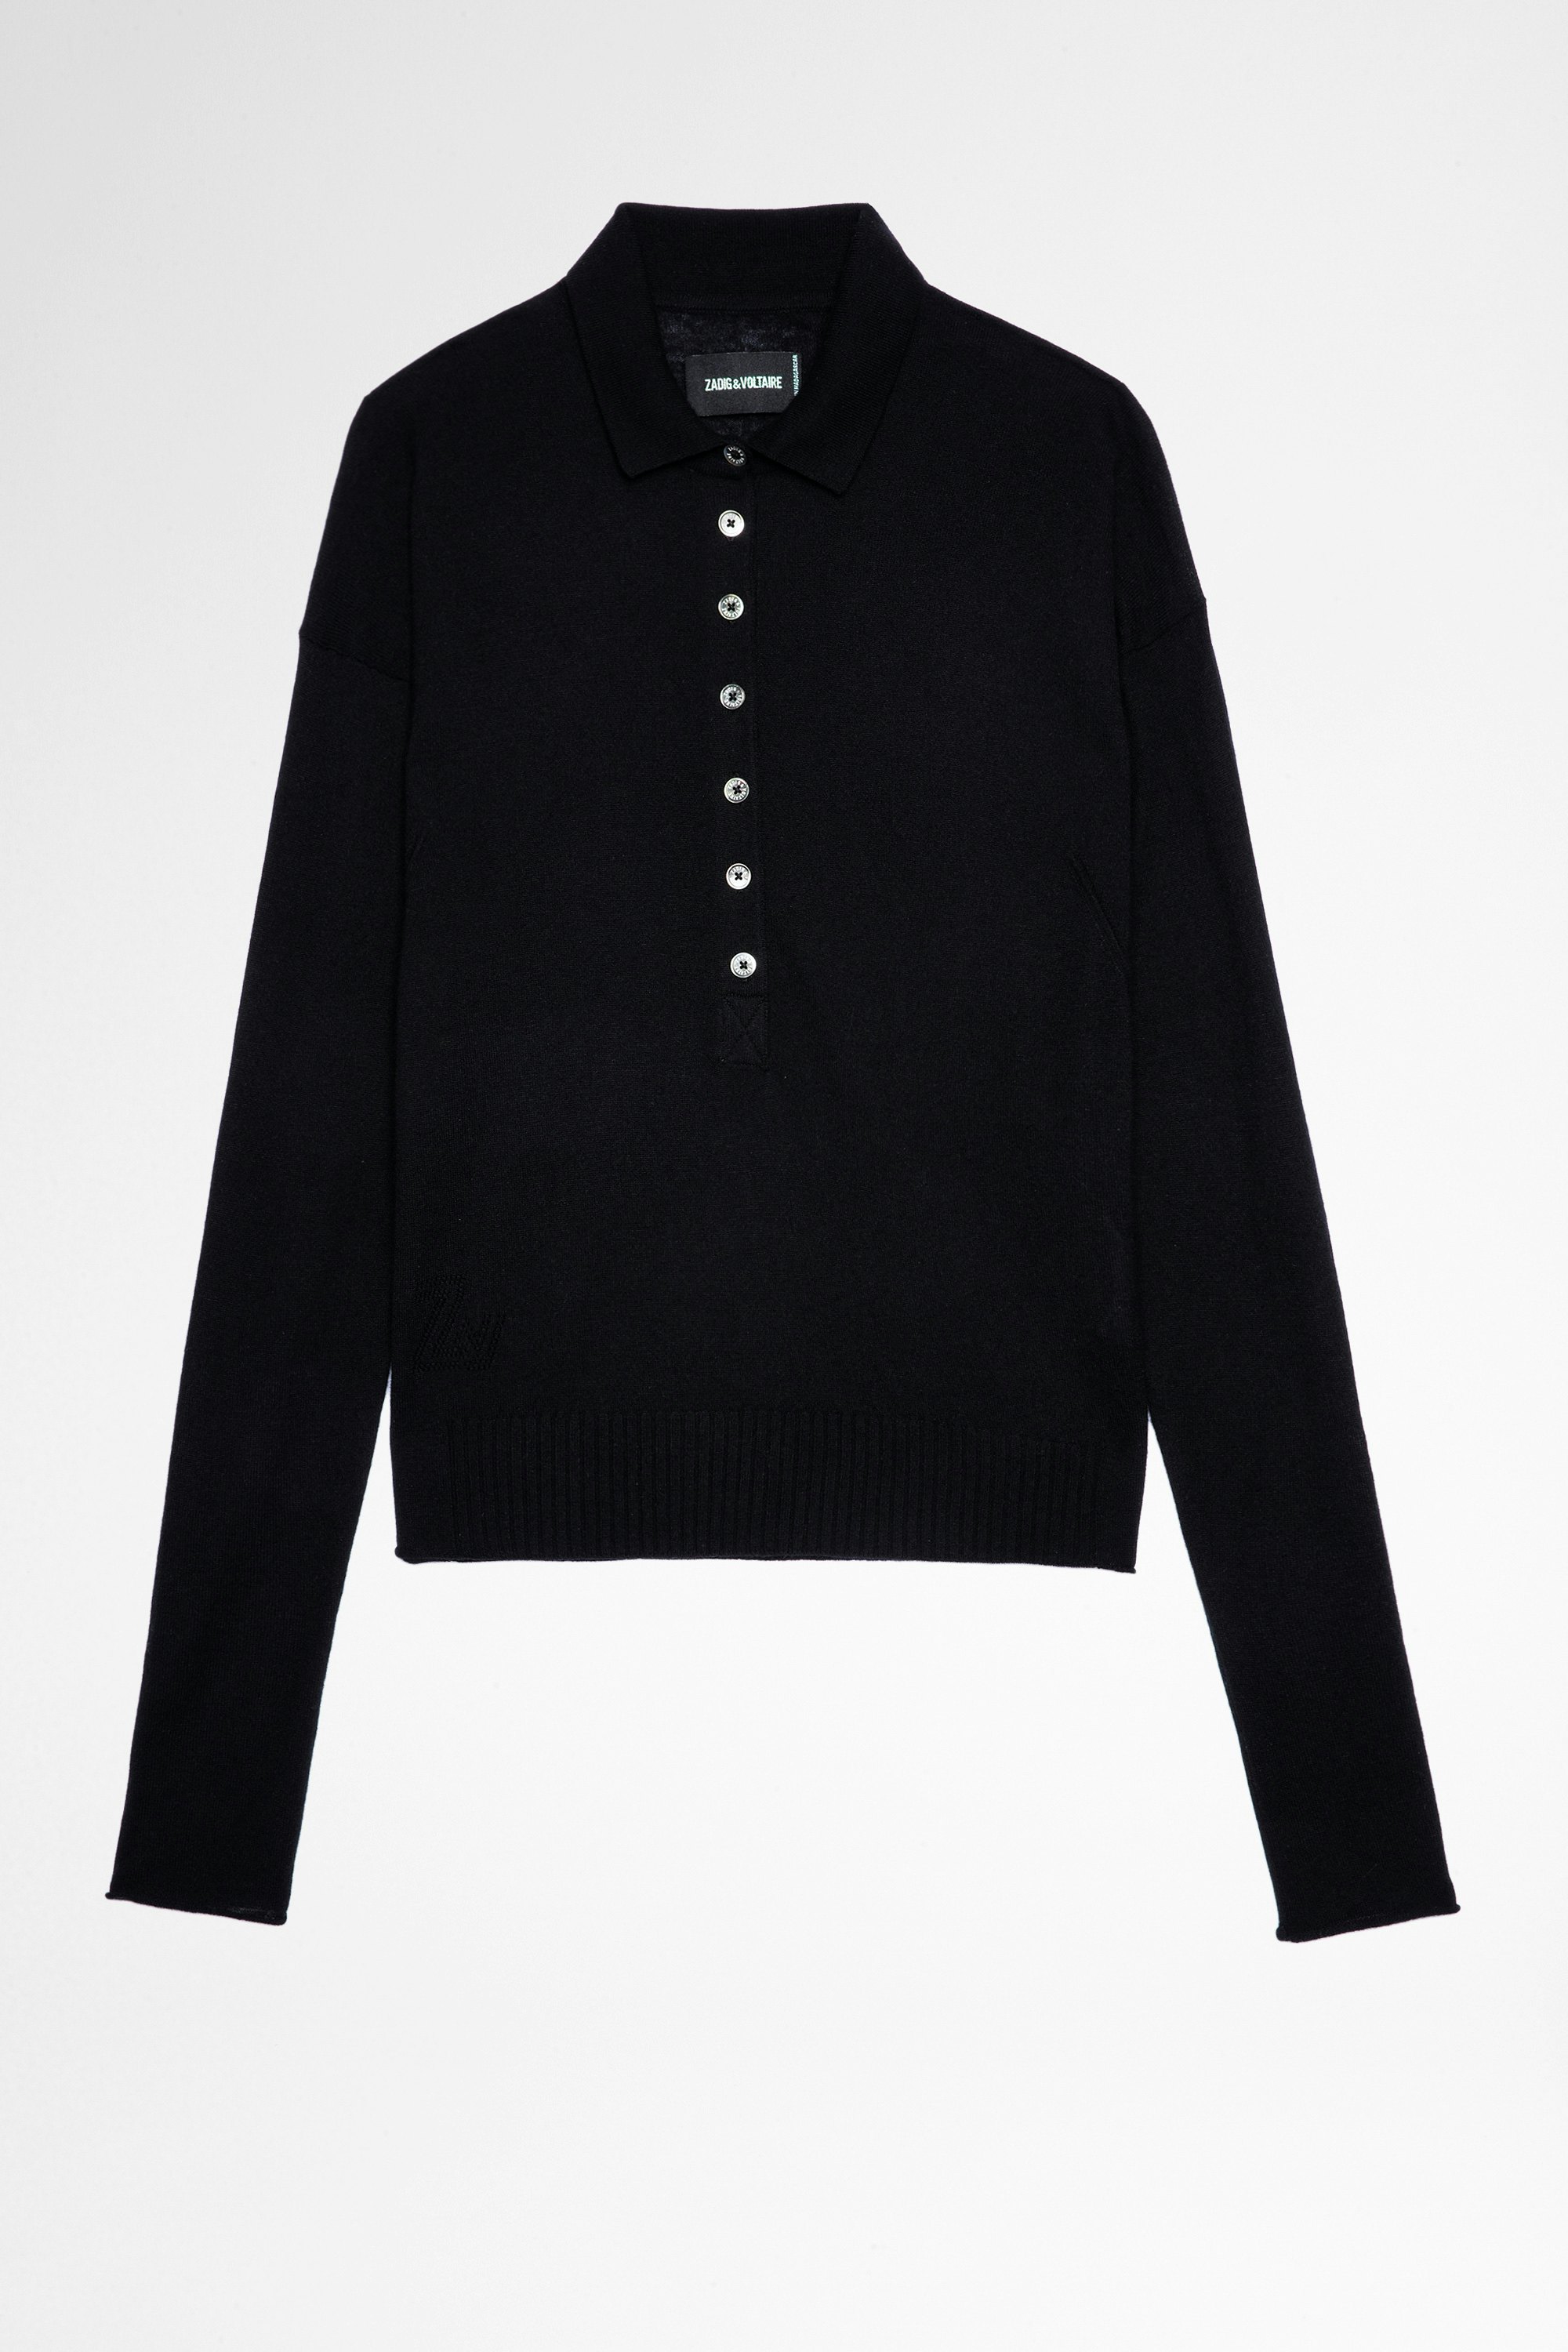 Marly カシミヤスウェット Women's black cashmere polo sweater